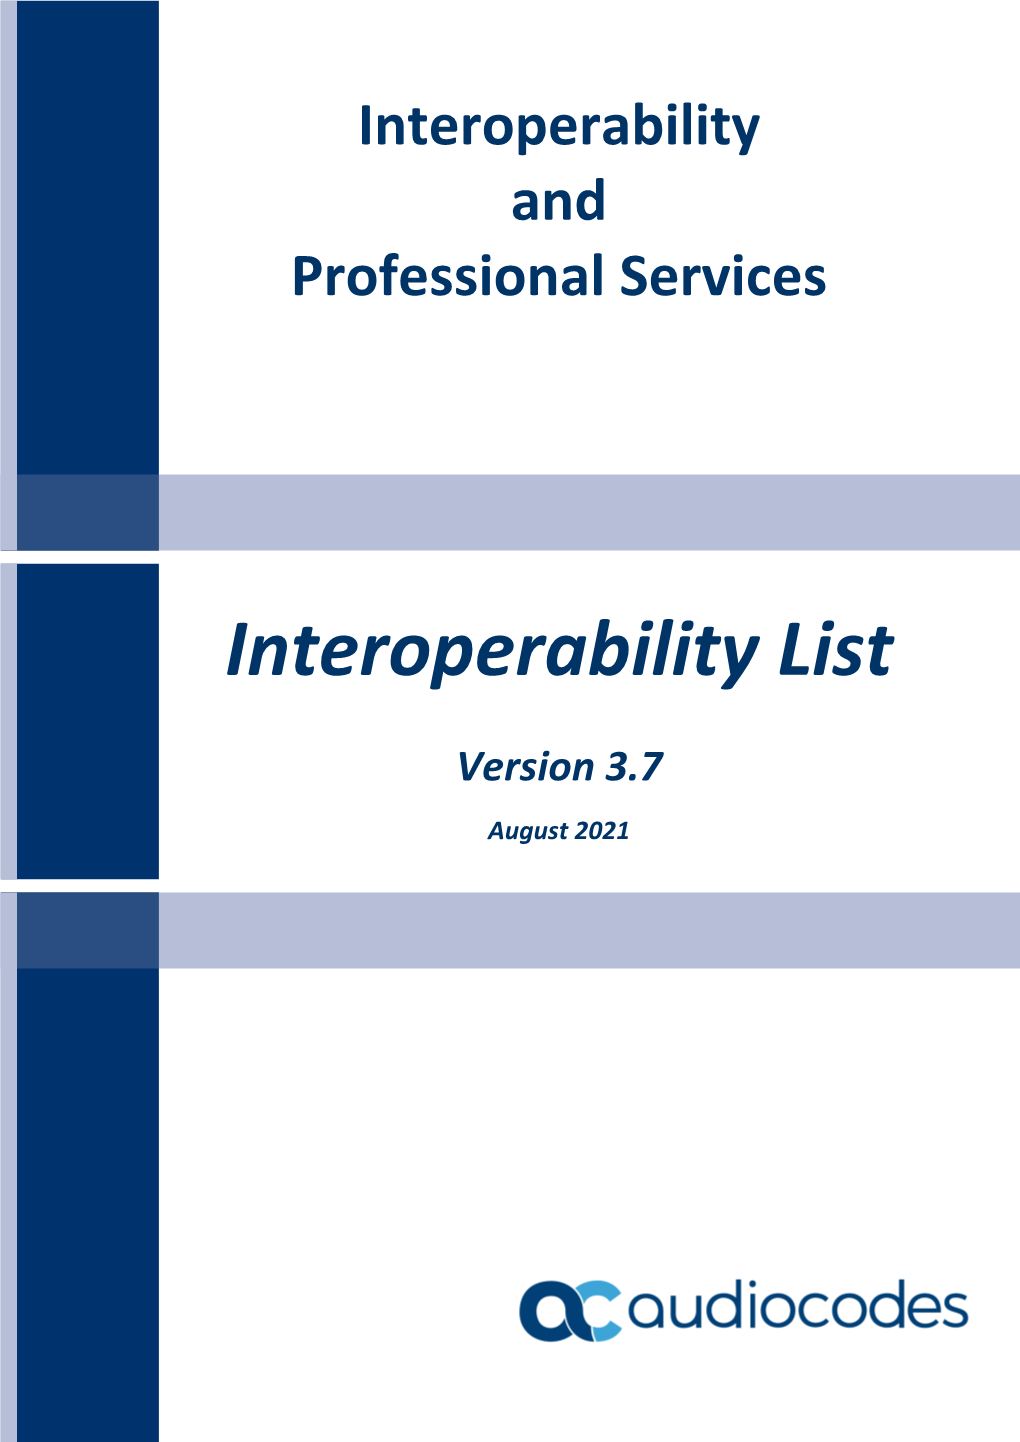 Download the Complete Interoperability List